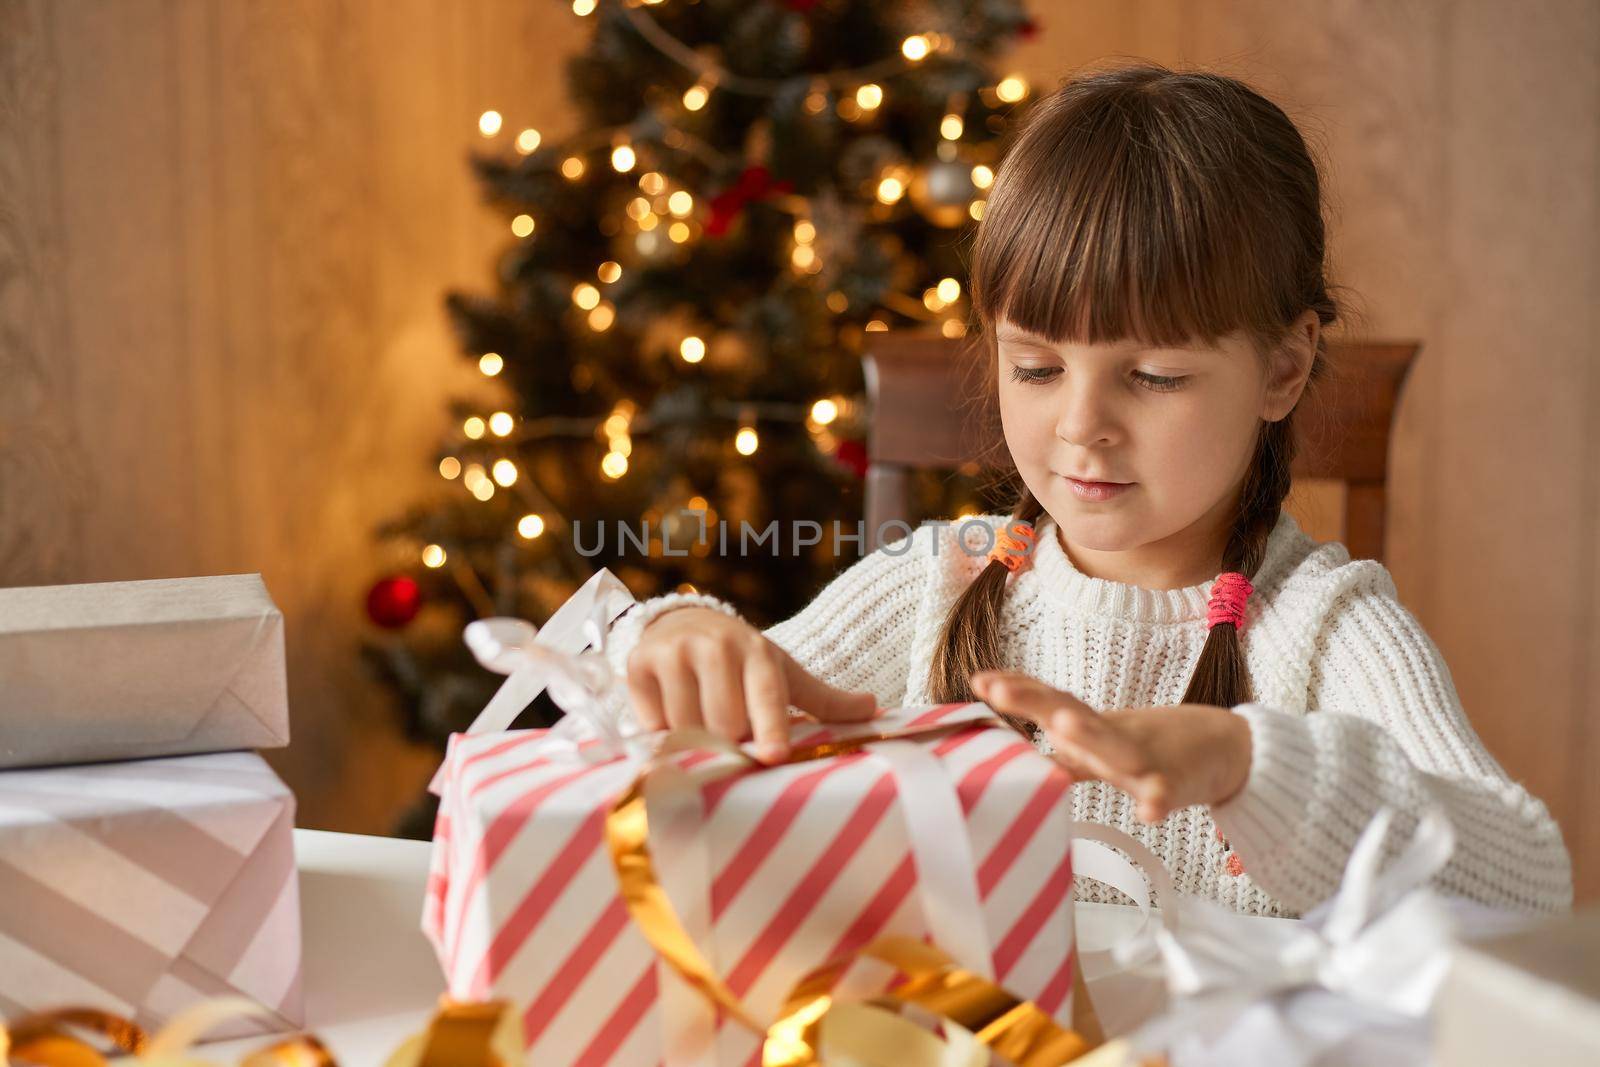 Happy girl opening gift box while sitting at table, female kid with pigtails looking at striped box with interest, little girl posing in room with x,mas tree on background.